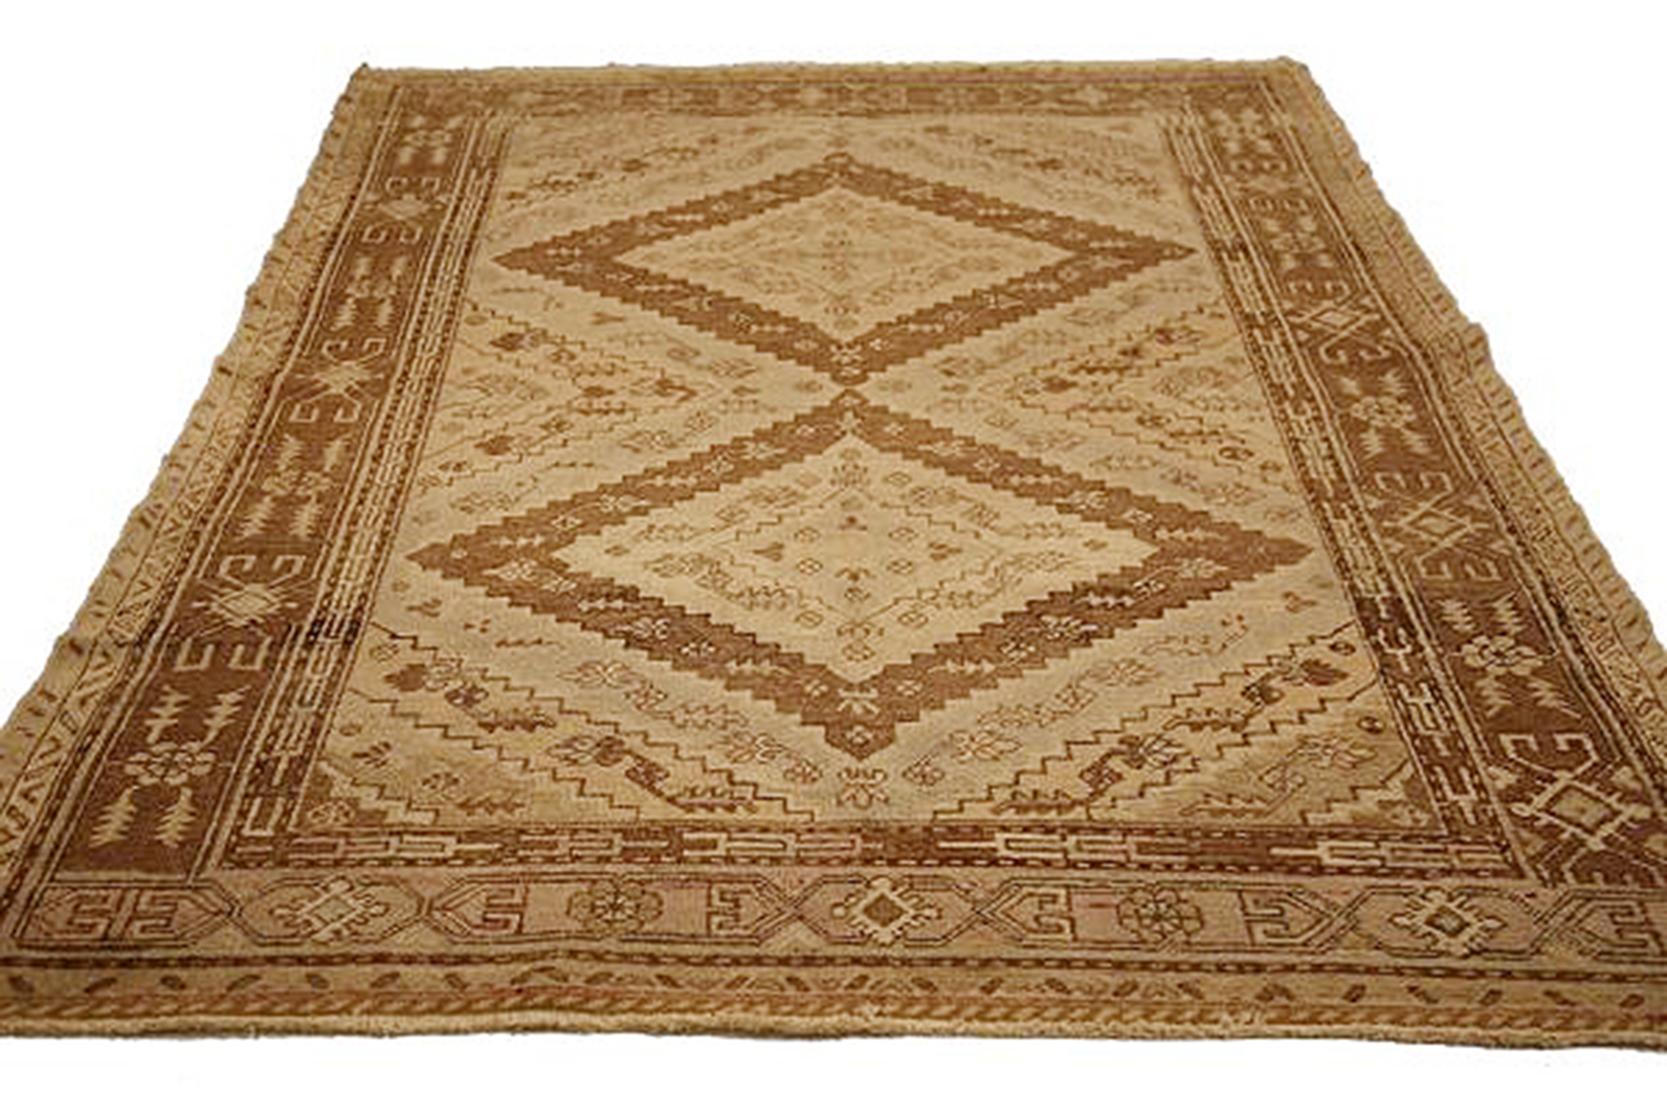 Antique Russian rug handwoven from the finest sheep’s wool and colored with all-natural vegetable dyes that are safe for humans and pets. Its woven using Khotan design featuring large diamond shaped central medallions over a beige field. It’s a